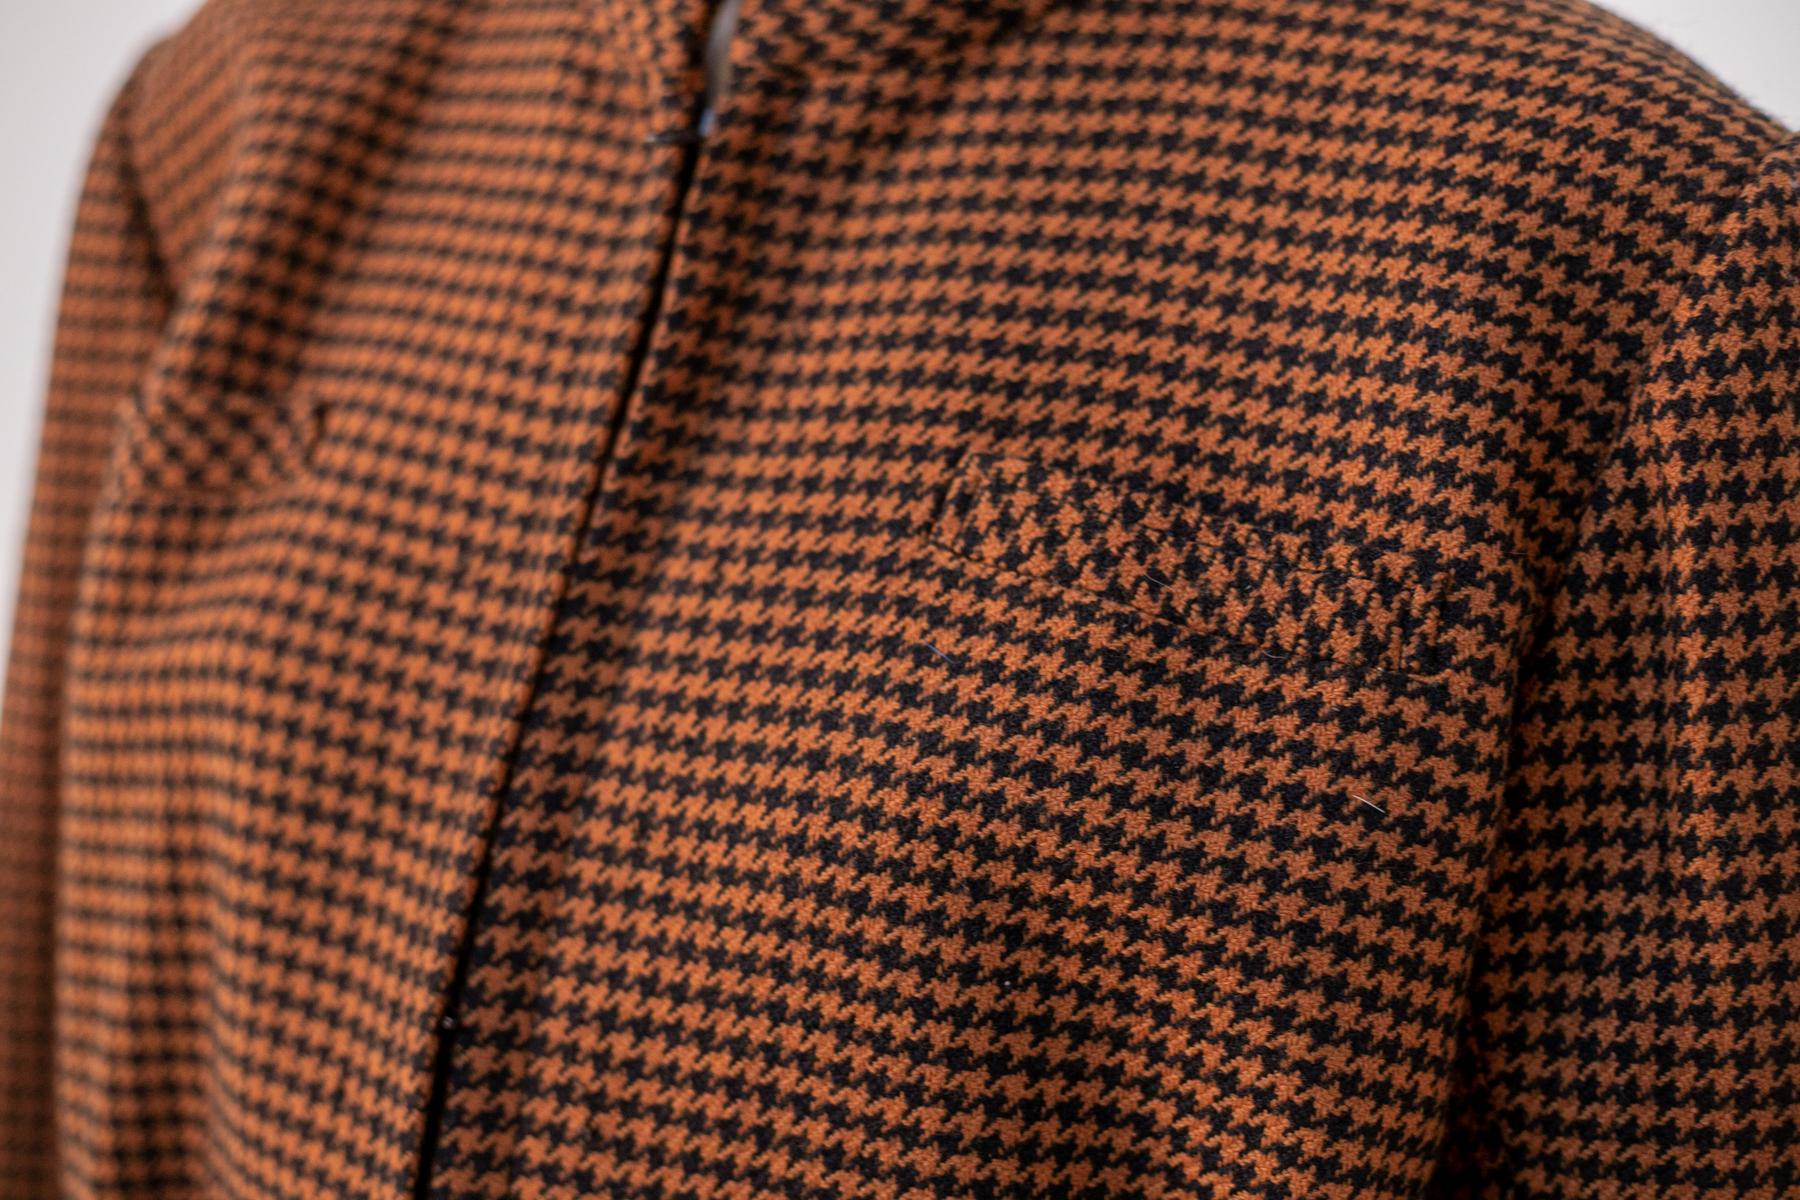 Whimsical vintage wool houndstooth jacket from the 1990s, made in Italy.
The jacket is totally made of orange and black wool, very soft, comes down to the waist. The collar is U-shaped compound. The sleeves are long, with high turned-up cuffs. The